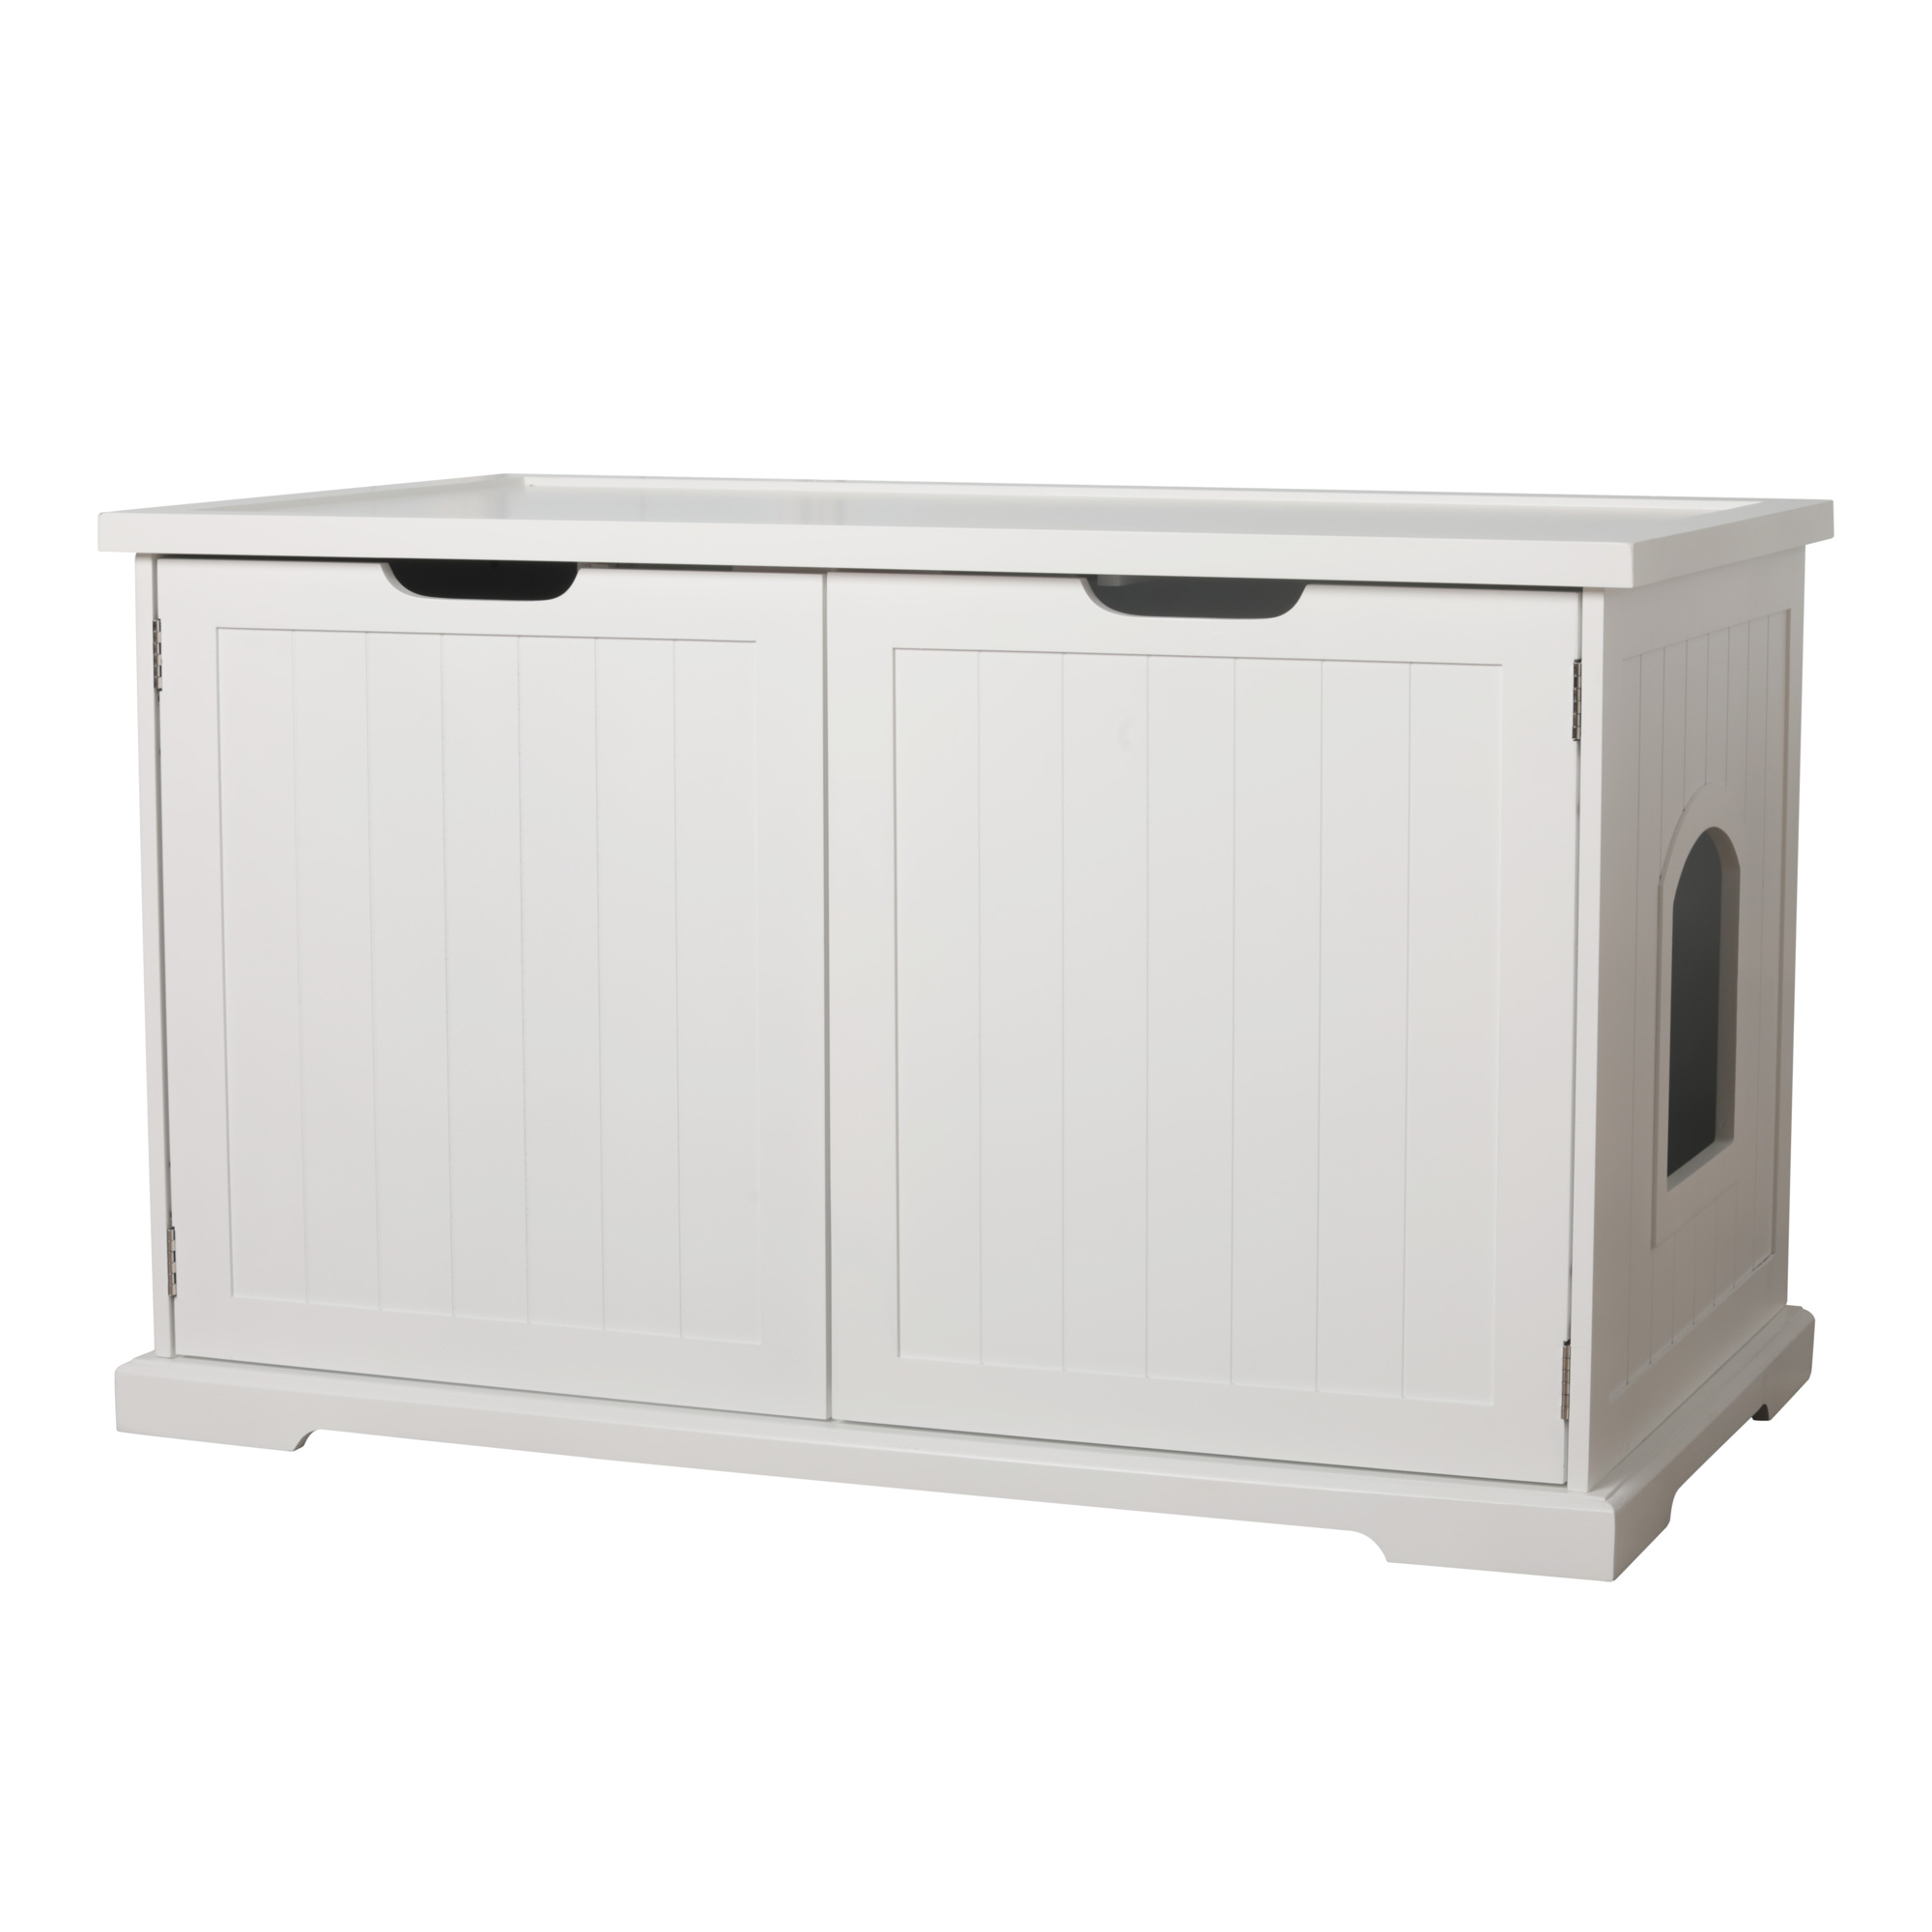 Merry Products, Cat Washroom Bench, White, Model MPS010